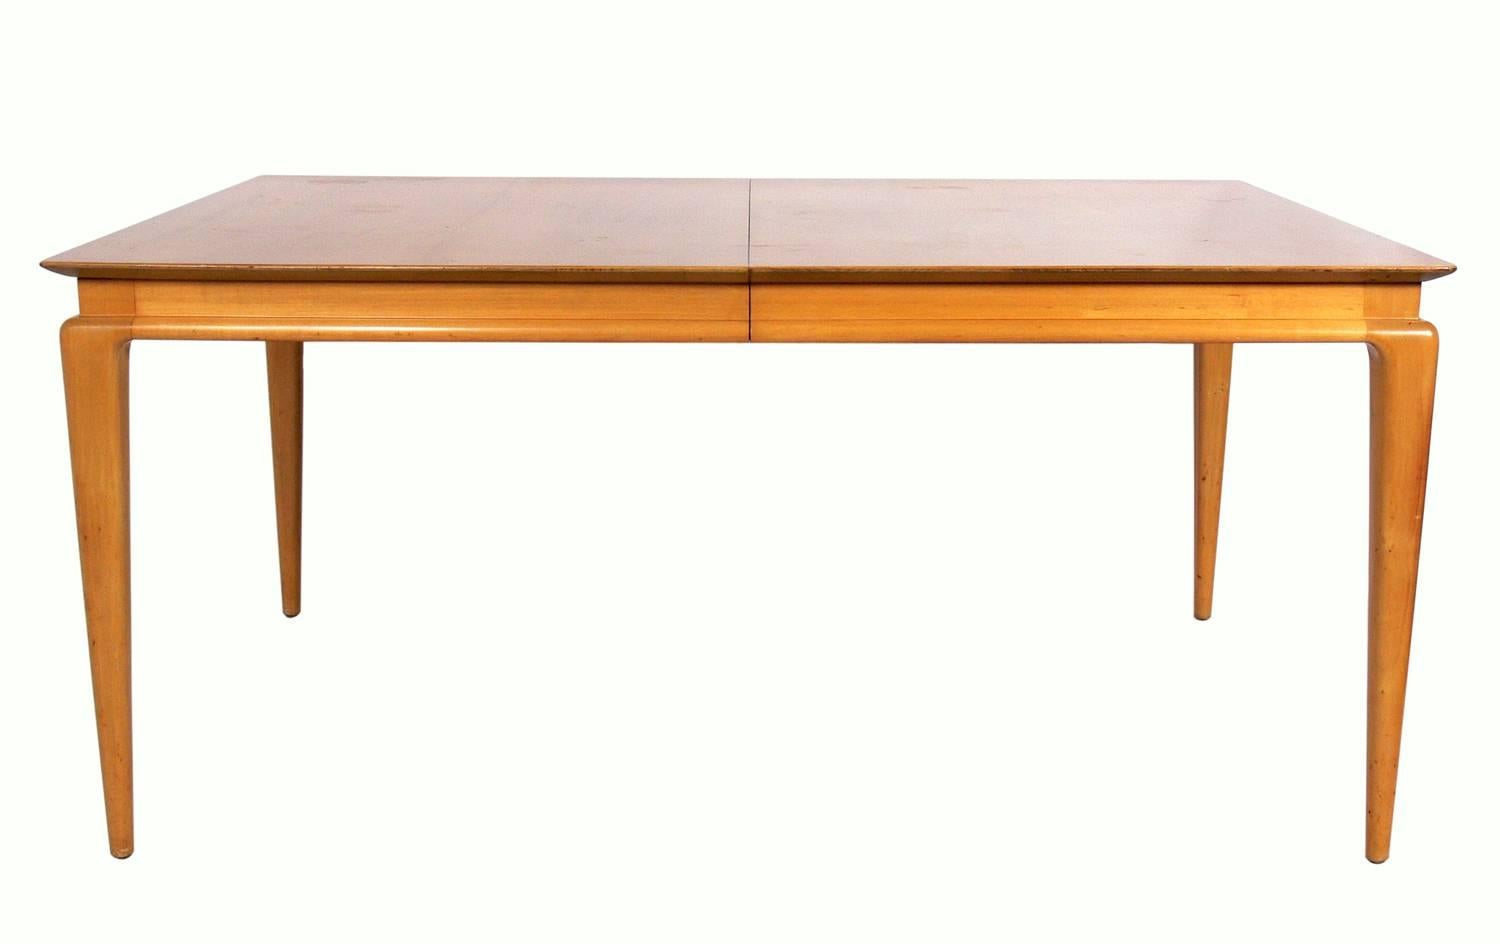 Swedish Mid-Century Modern dining table, Sweden, circa 1960s. With all three leaves, the table measures an impressive 97